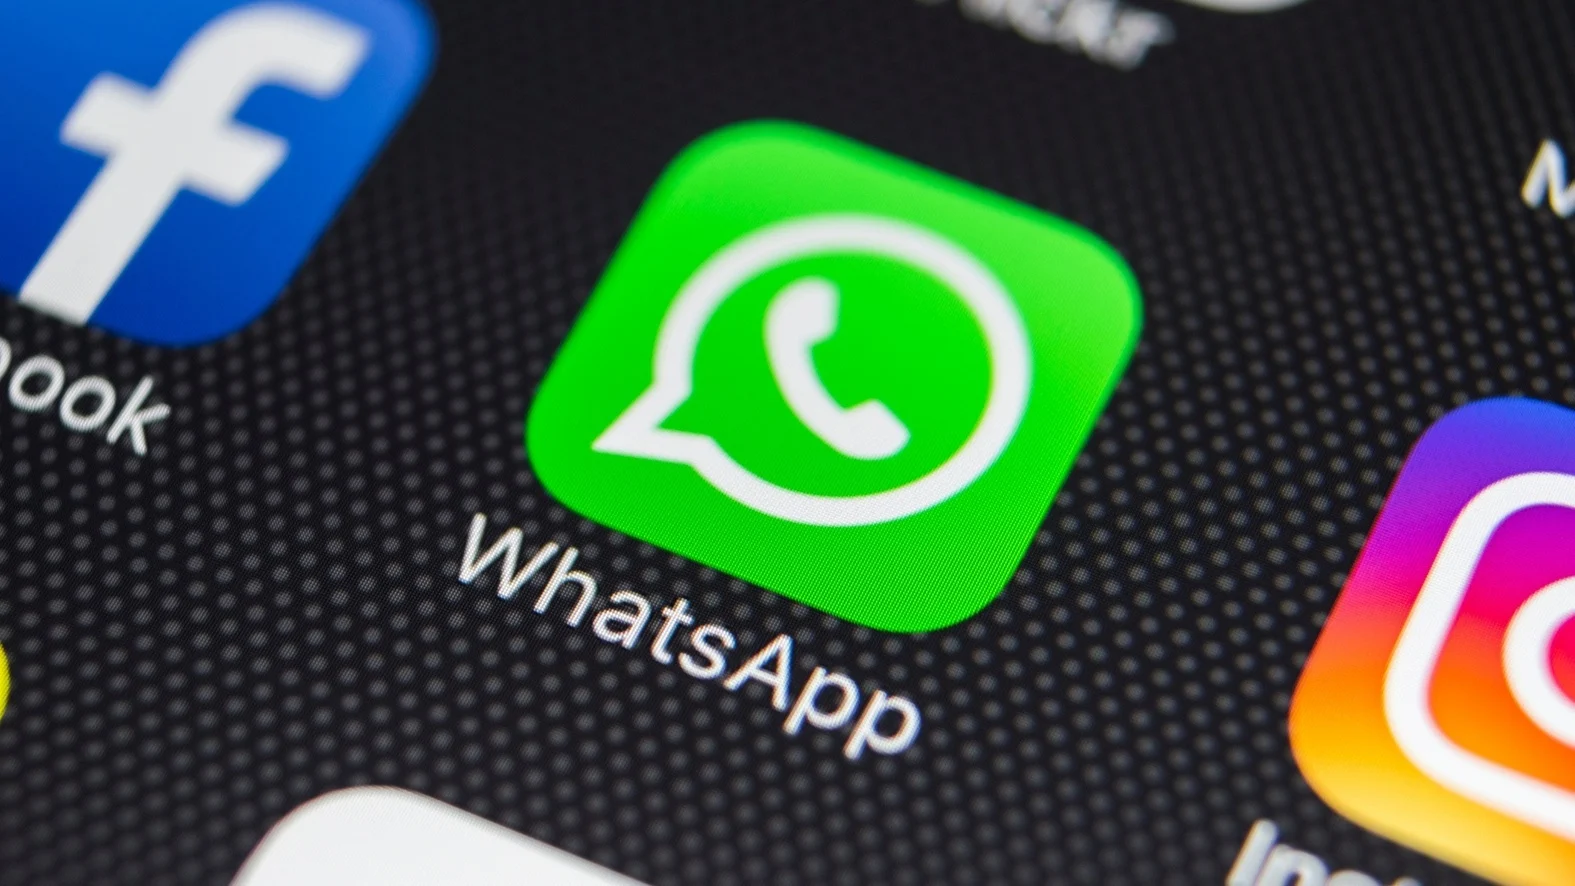 WhatsApp will soon add new smart tools for editing pictures.